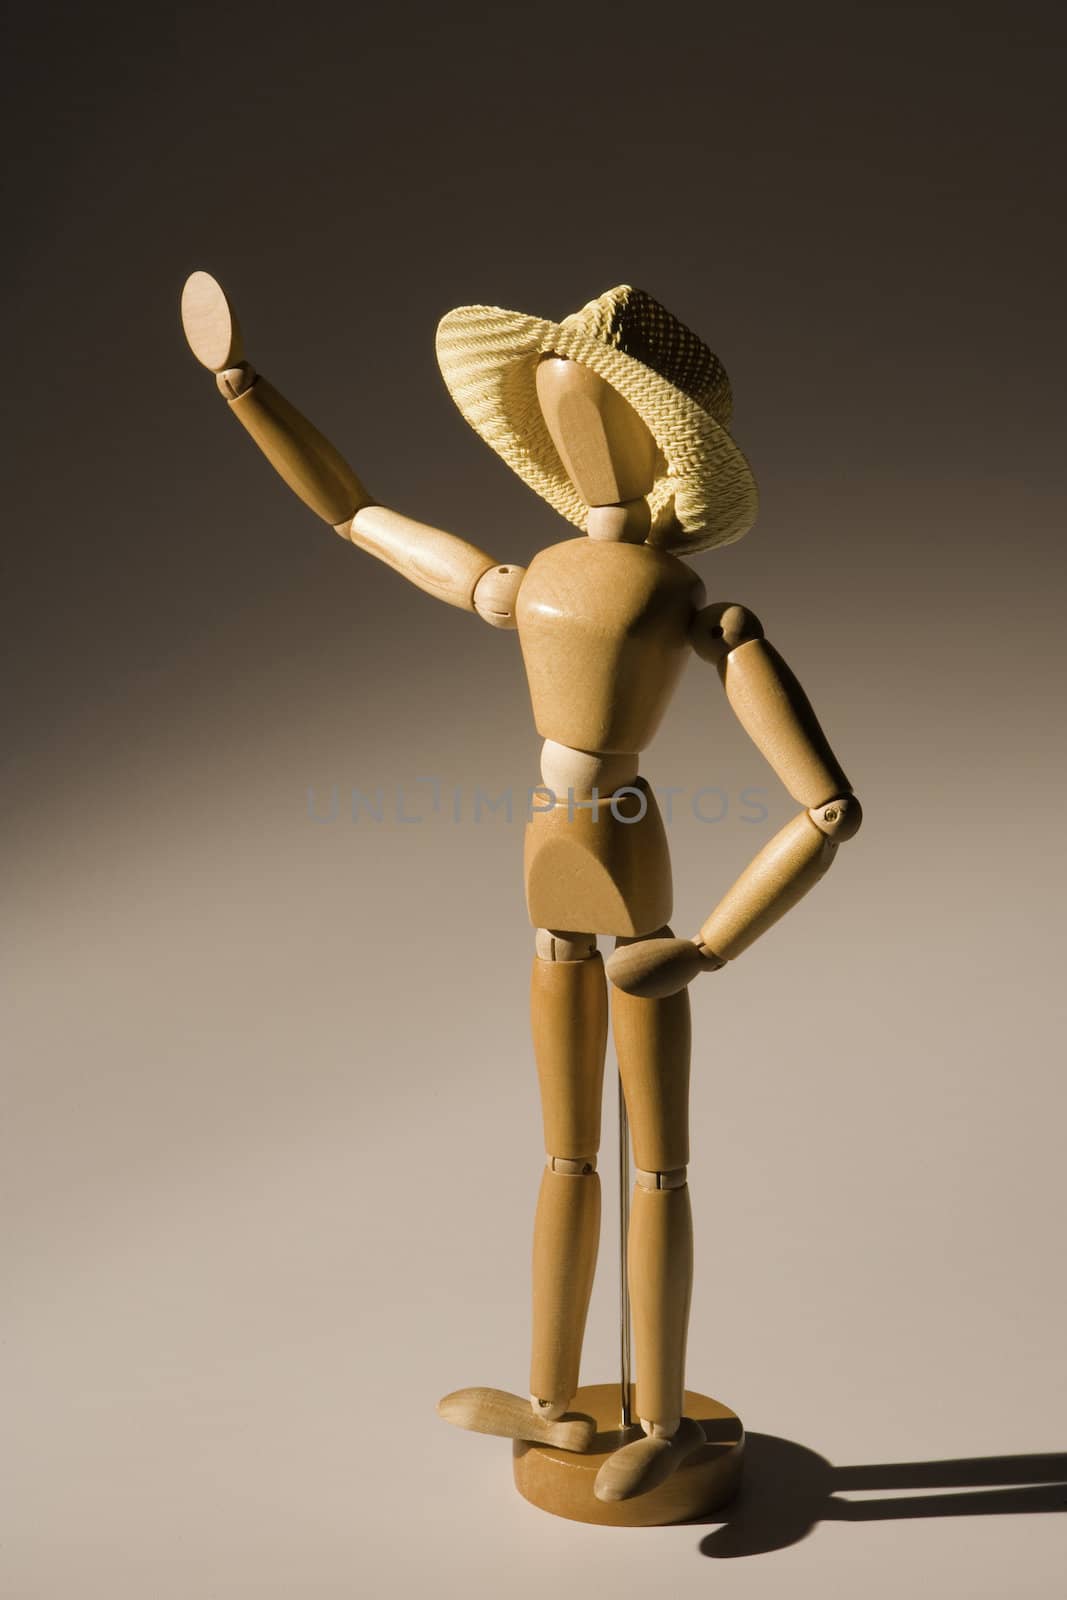 rural wooden figure by hotflash2001